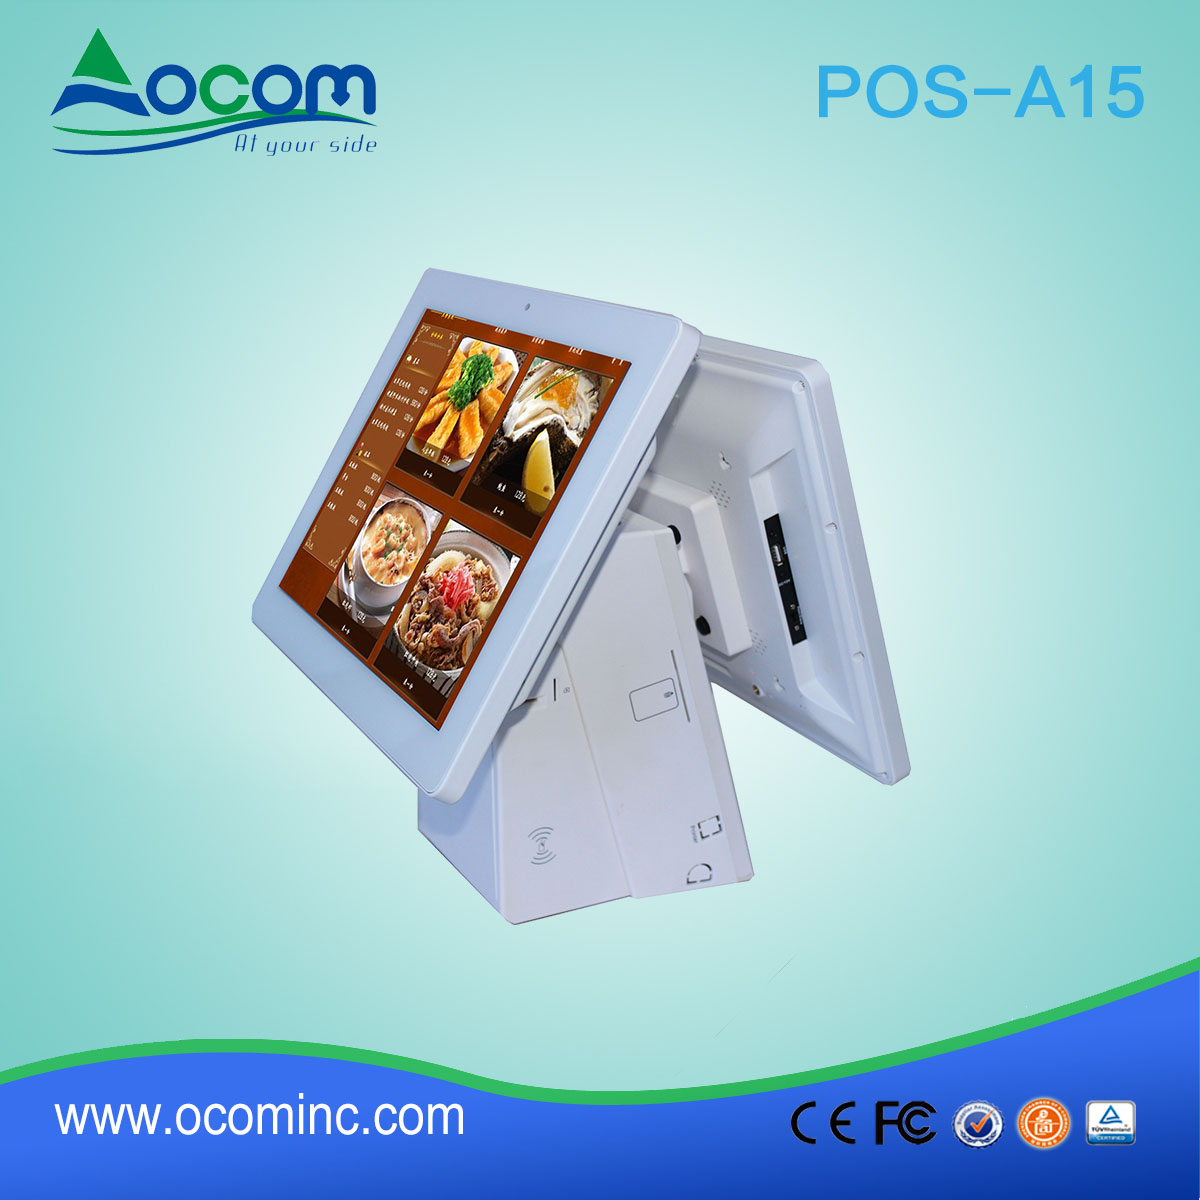 (POS-A15) Windows \/ Android Touch screen POS terminalu z 58mm \/ 80mm drukarka termiczna